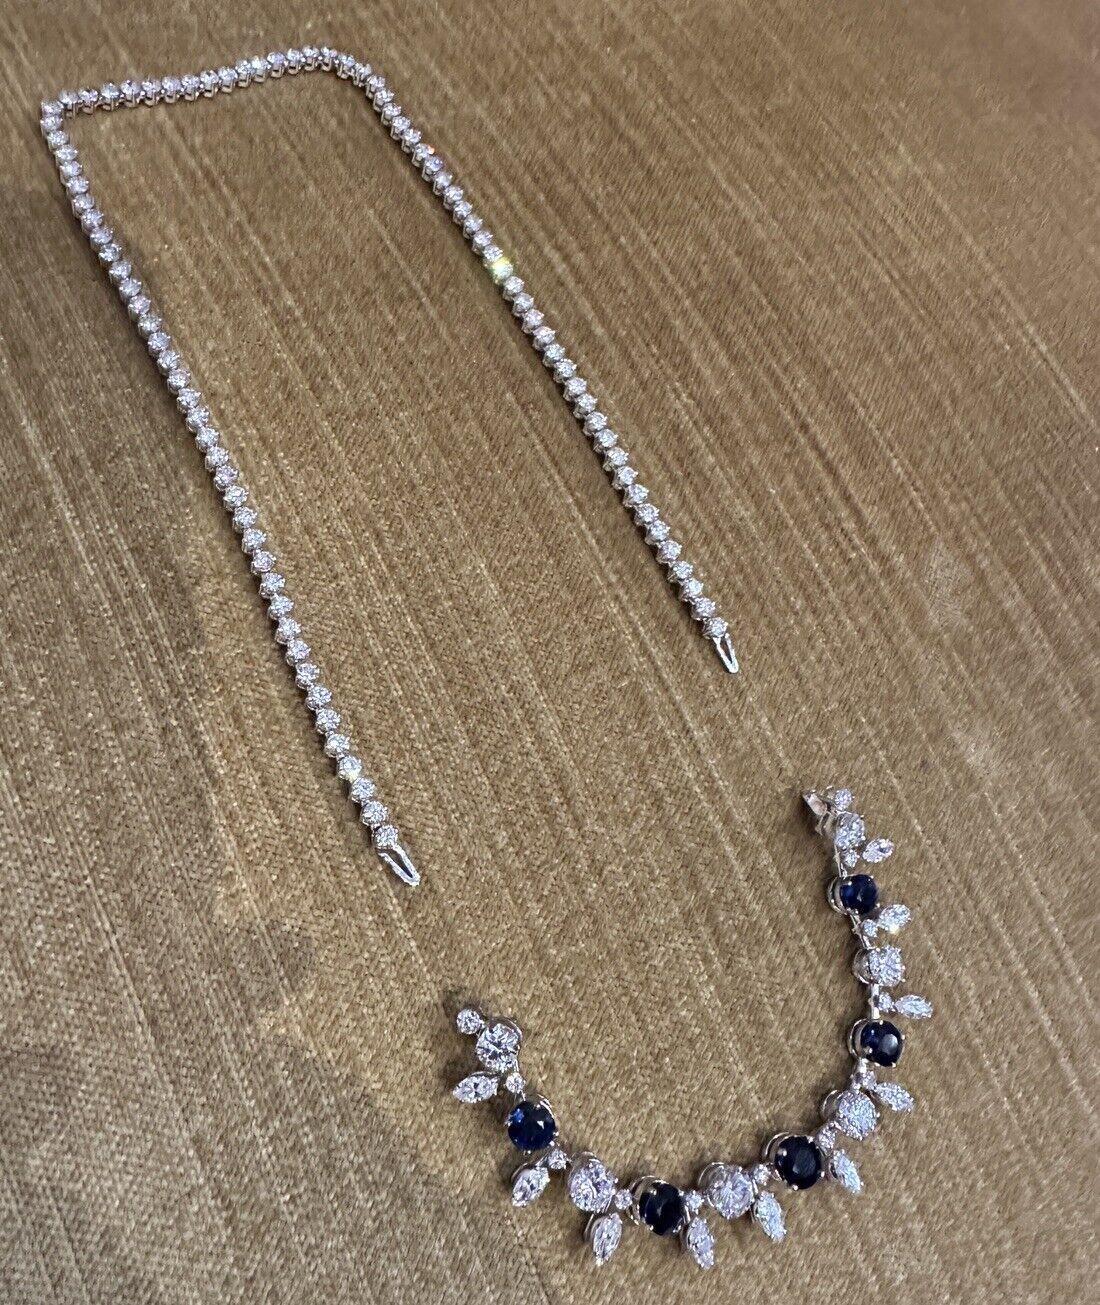 Vintage Sapphire and Diamond Choker Necklace in Platinum and 18k White Gold

Vintage Diamond and Sapphire Necklace features 5 Natural Round Blue Sapphires and Natural Round Brilliant and Marquise Diamonds in the front, set in 18k White Gold,